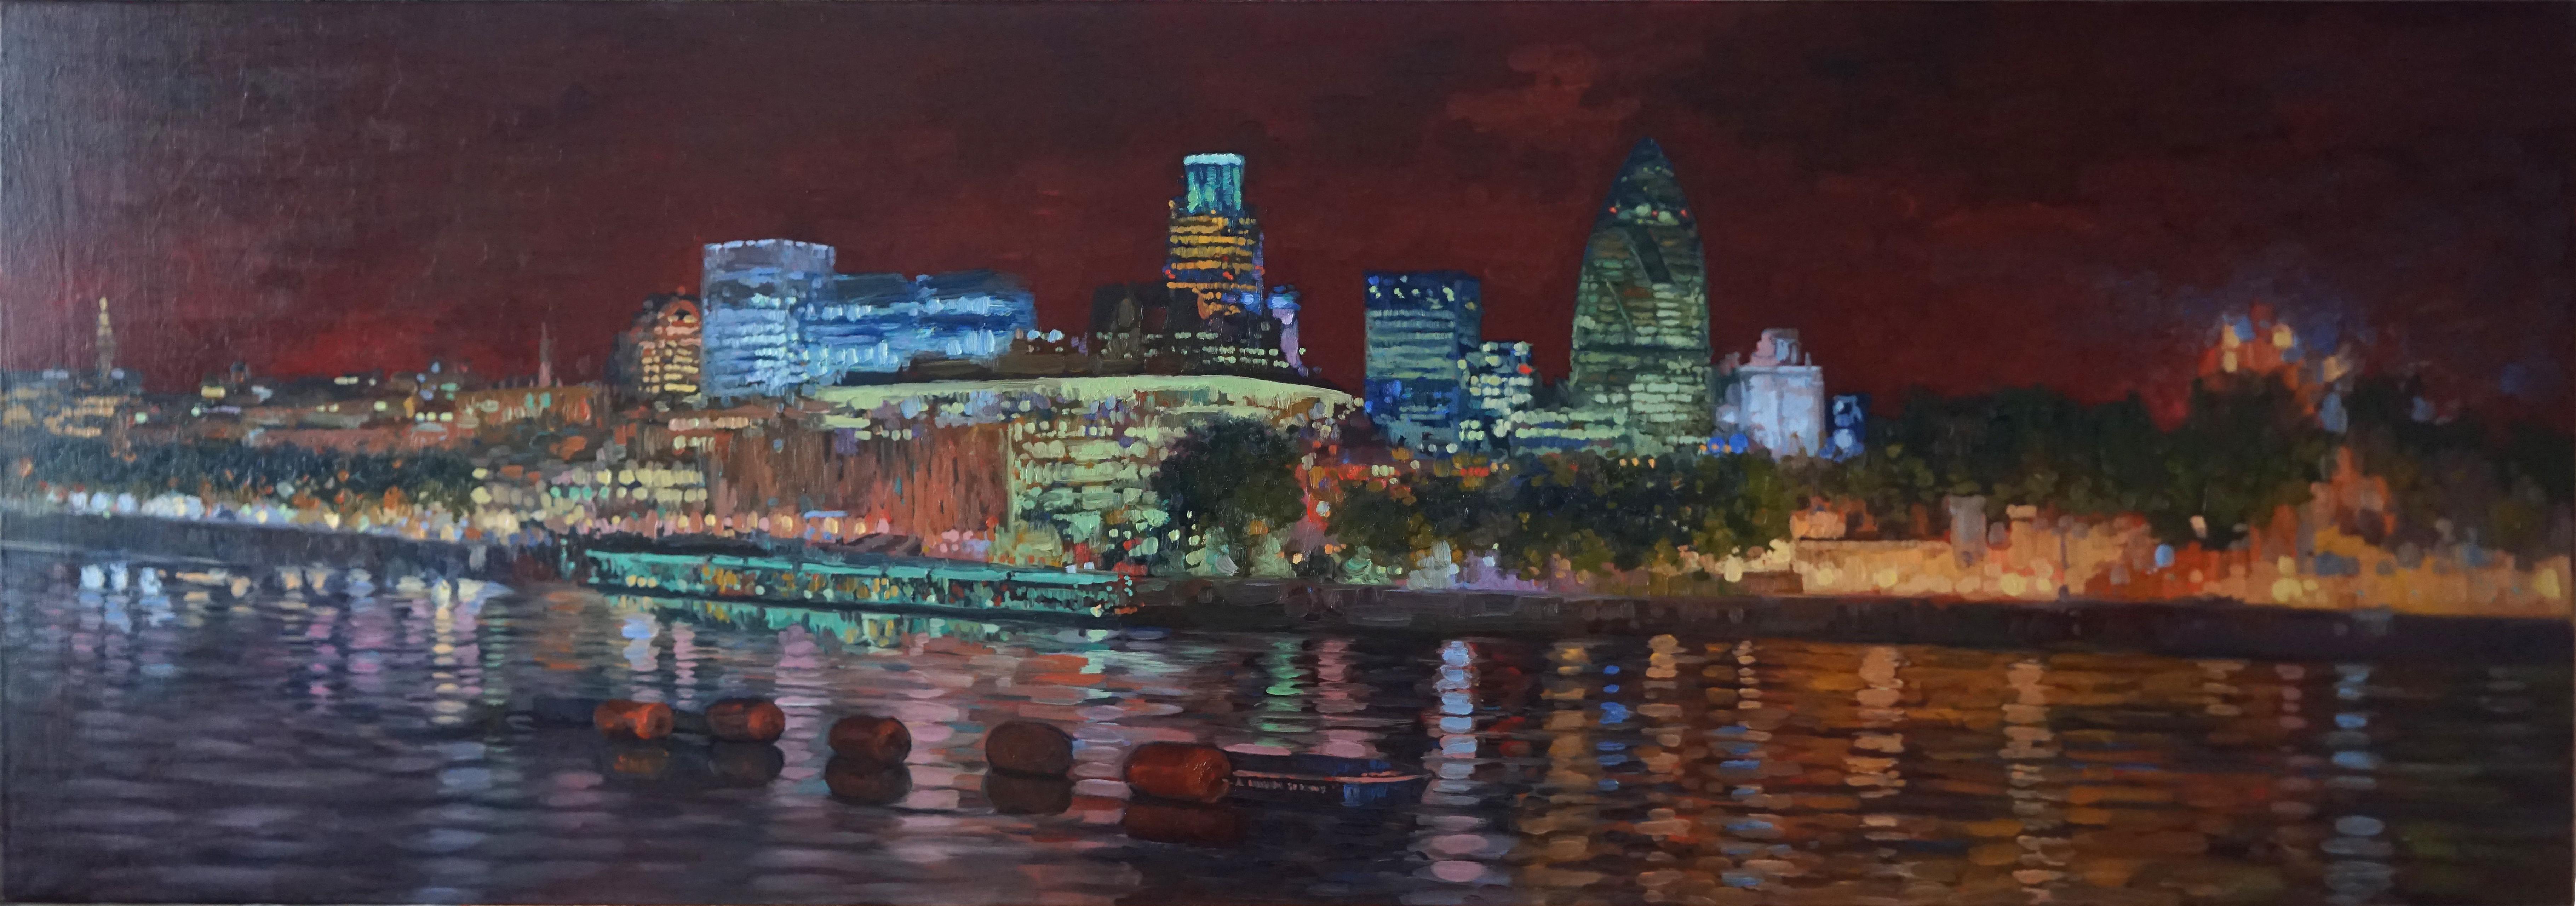 Simon Kozhin Landscape Painting - View of the City From the Thames